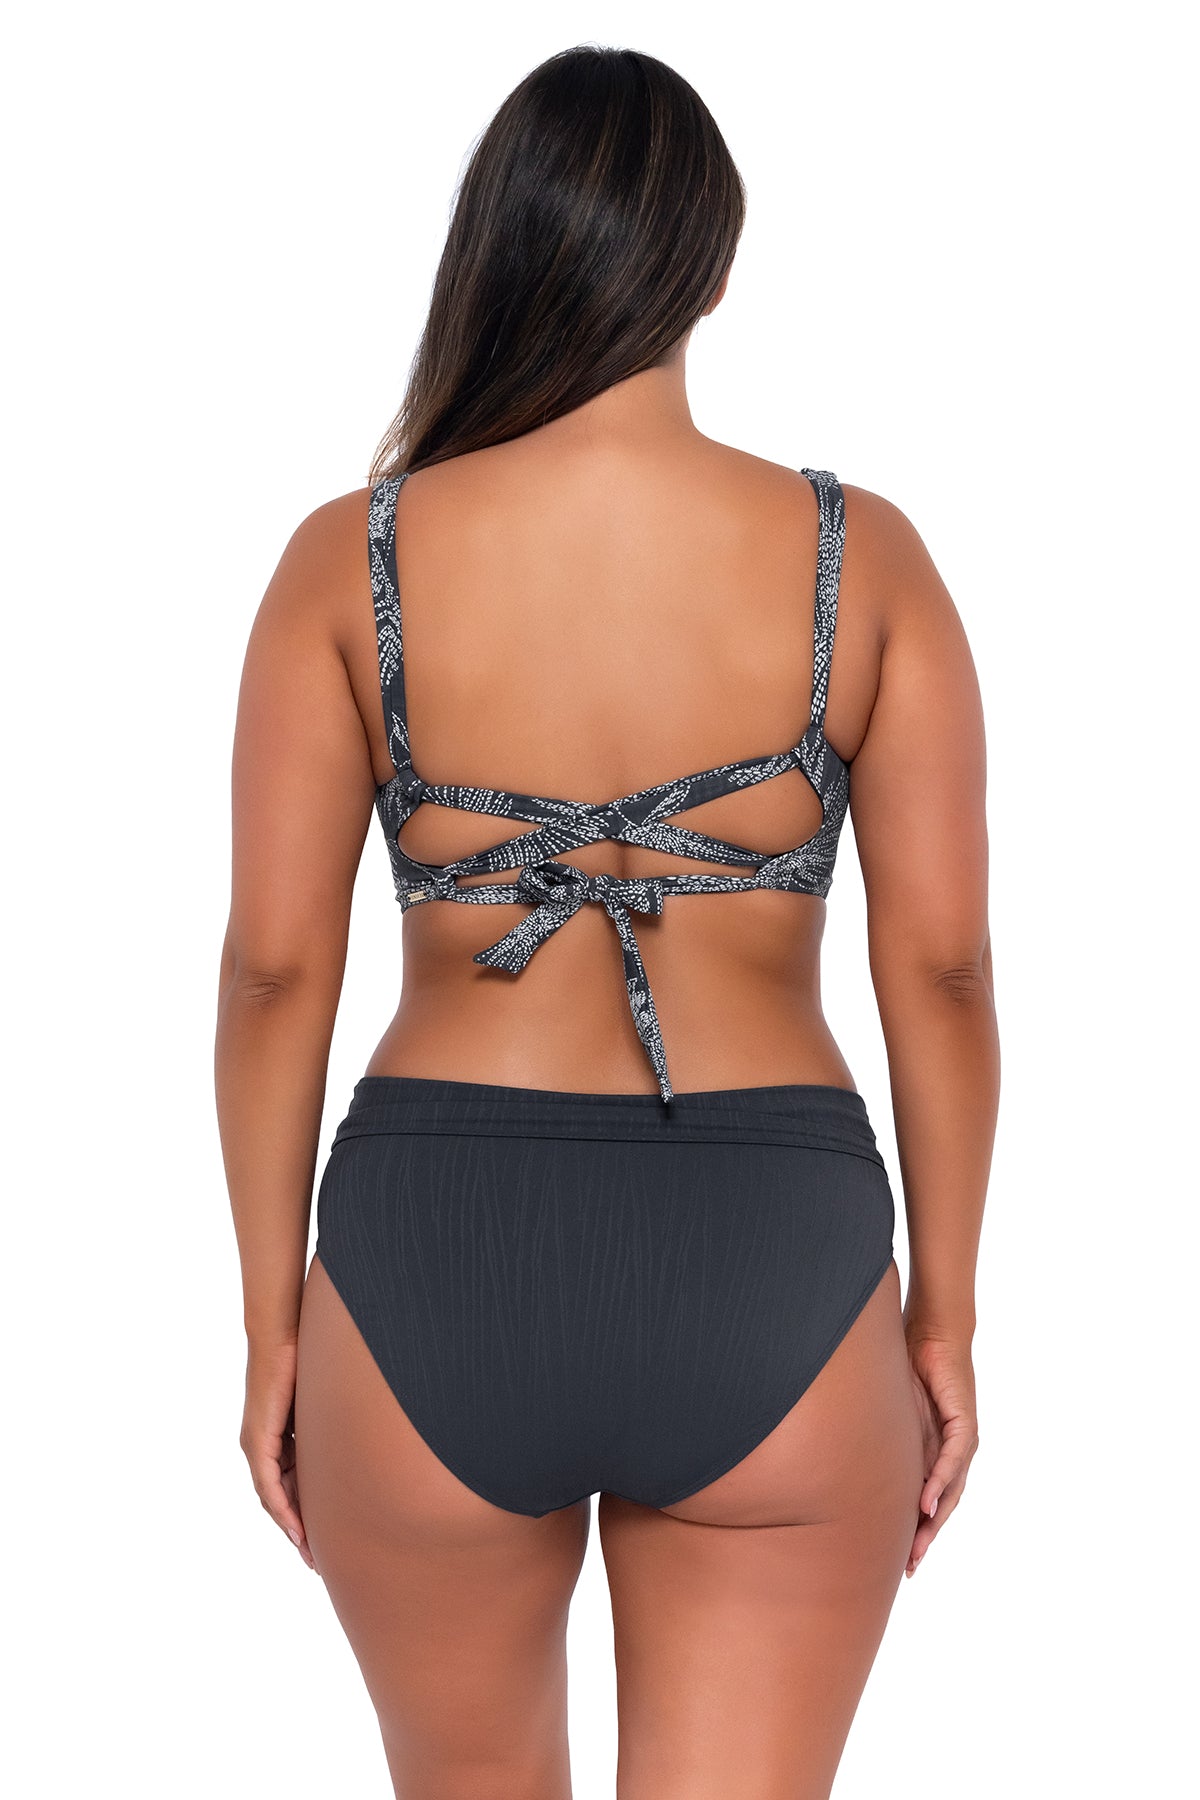 Back pose #1 of Nicky wearing Sunsets Fanfare Seagrass Texture Elsie Top with matching Hannah High Waist bikini bottom